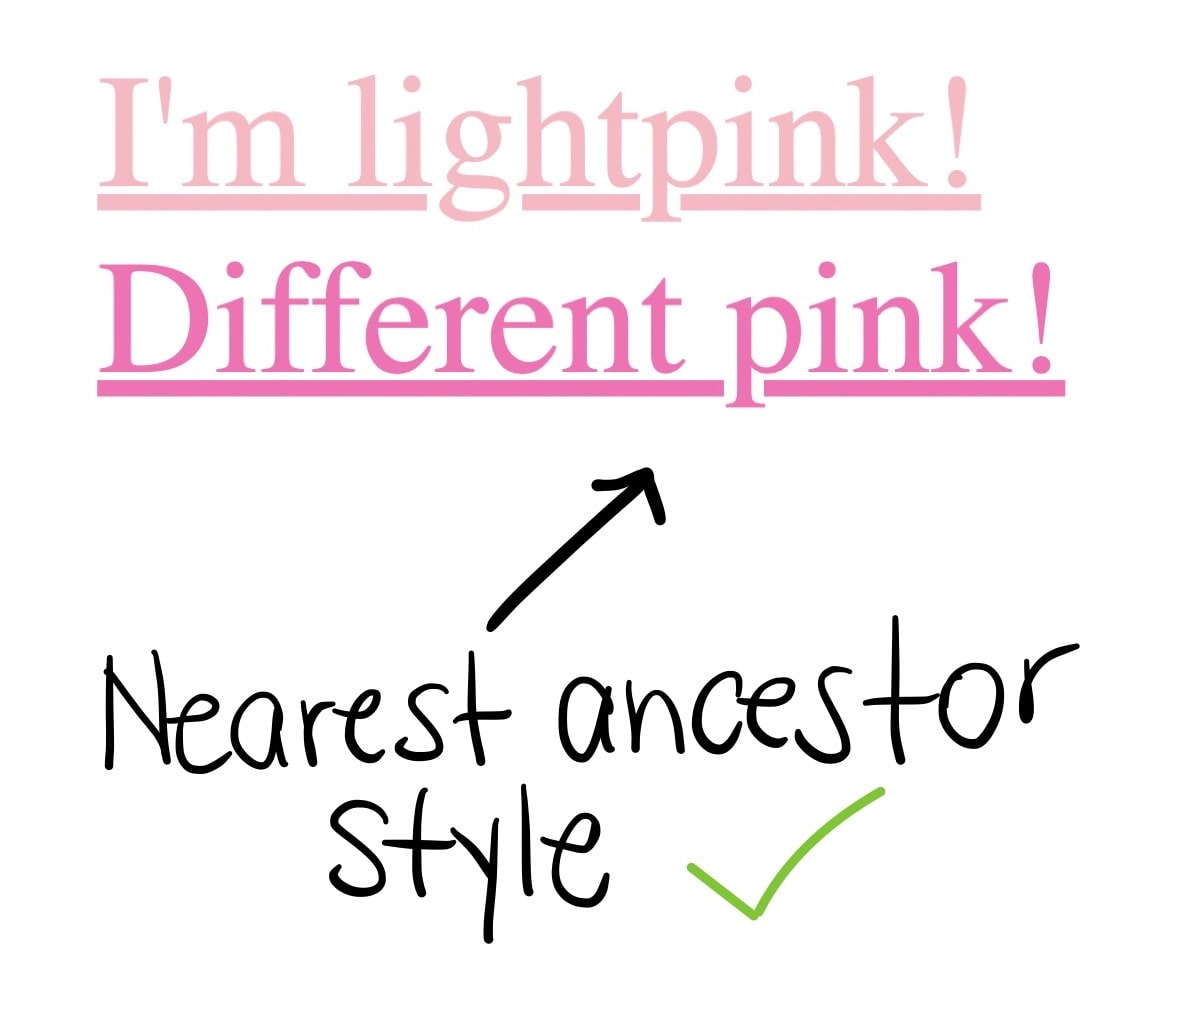 Two links, the first one reads ''I''m lightpink!'' the second one reads 'Different pink', second link is a darker pink, under the links text nearest ancestor style and has a green checkmark next to it.